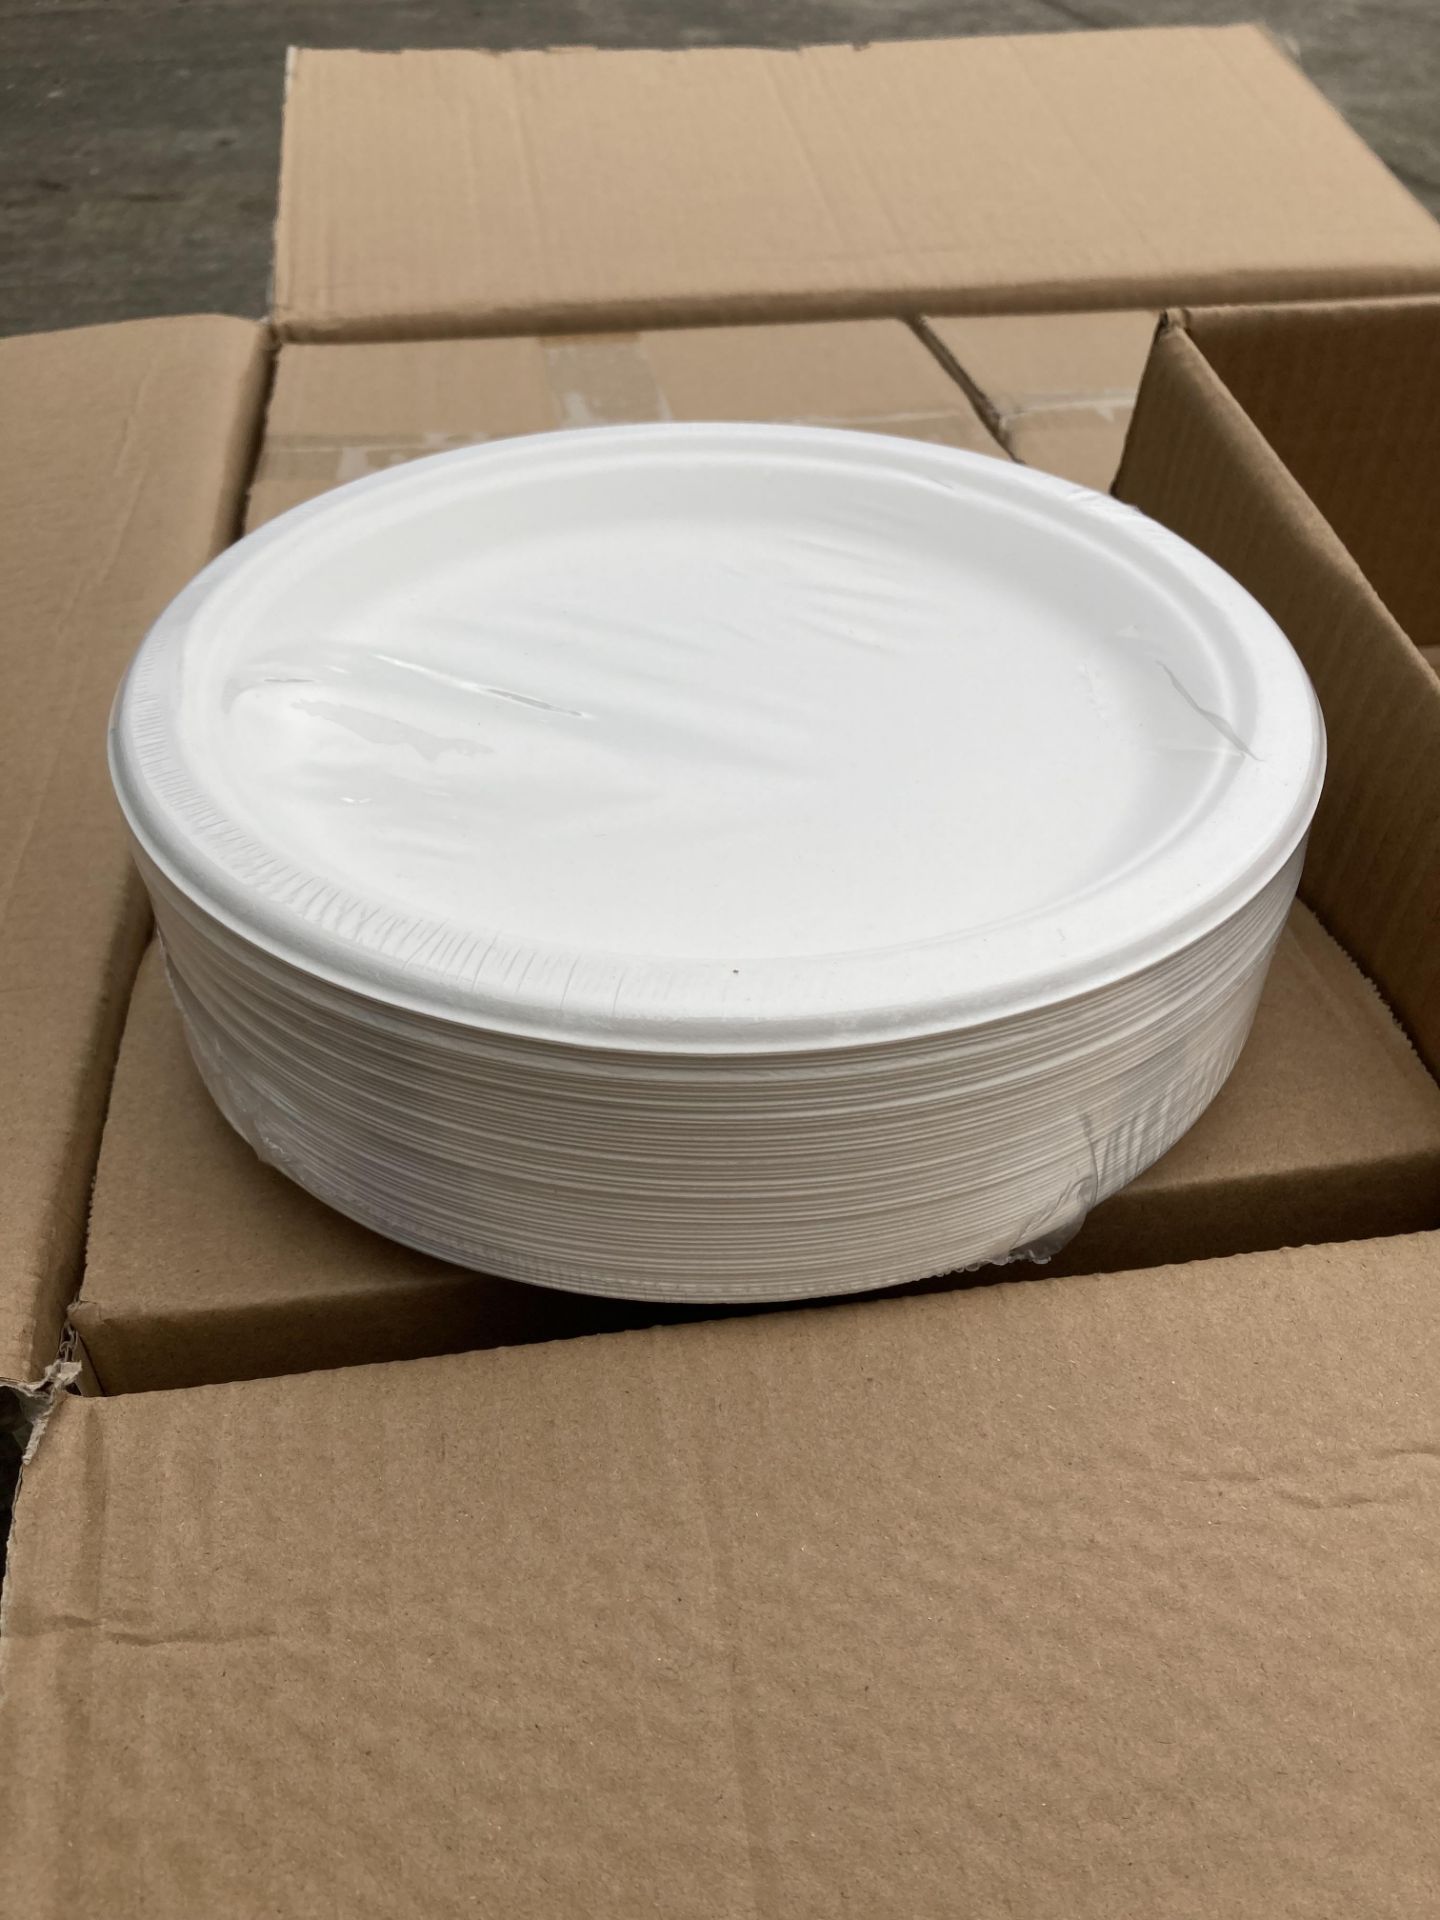 12 x Boxes of Wooden Cutlery and Paper Plates (1 x outer box) (saleroom location: Container 9) - Image 3 of 3